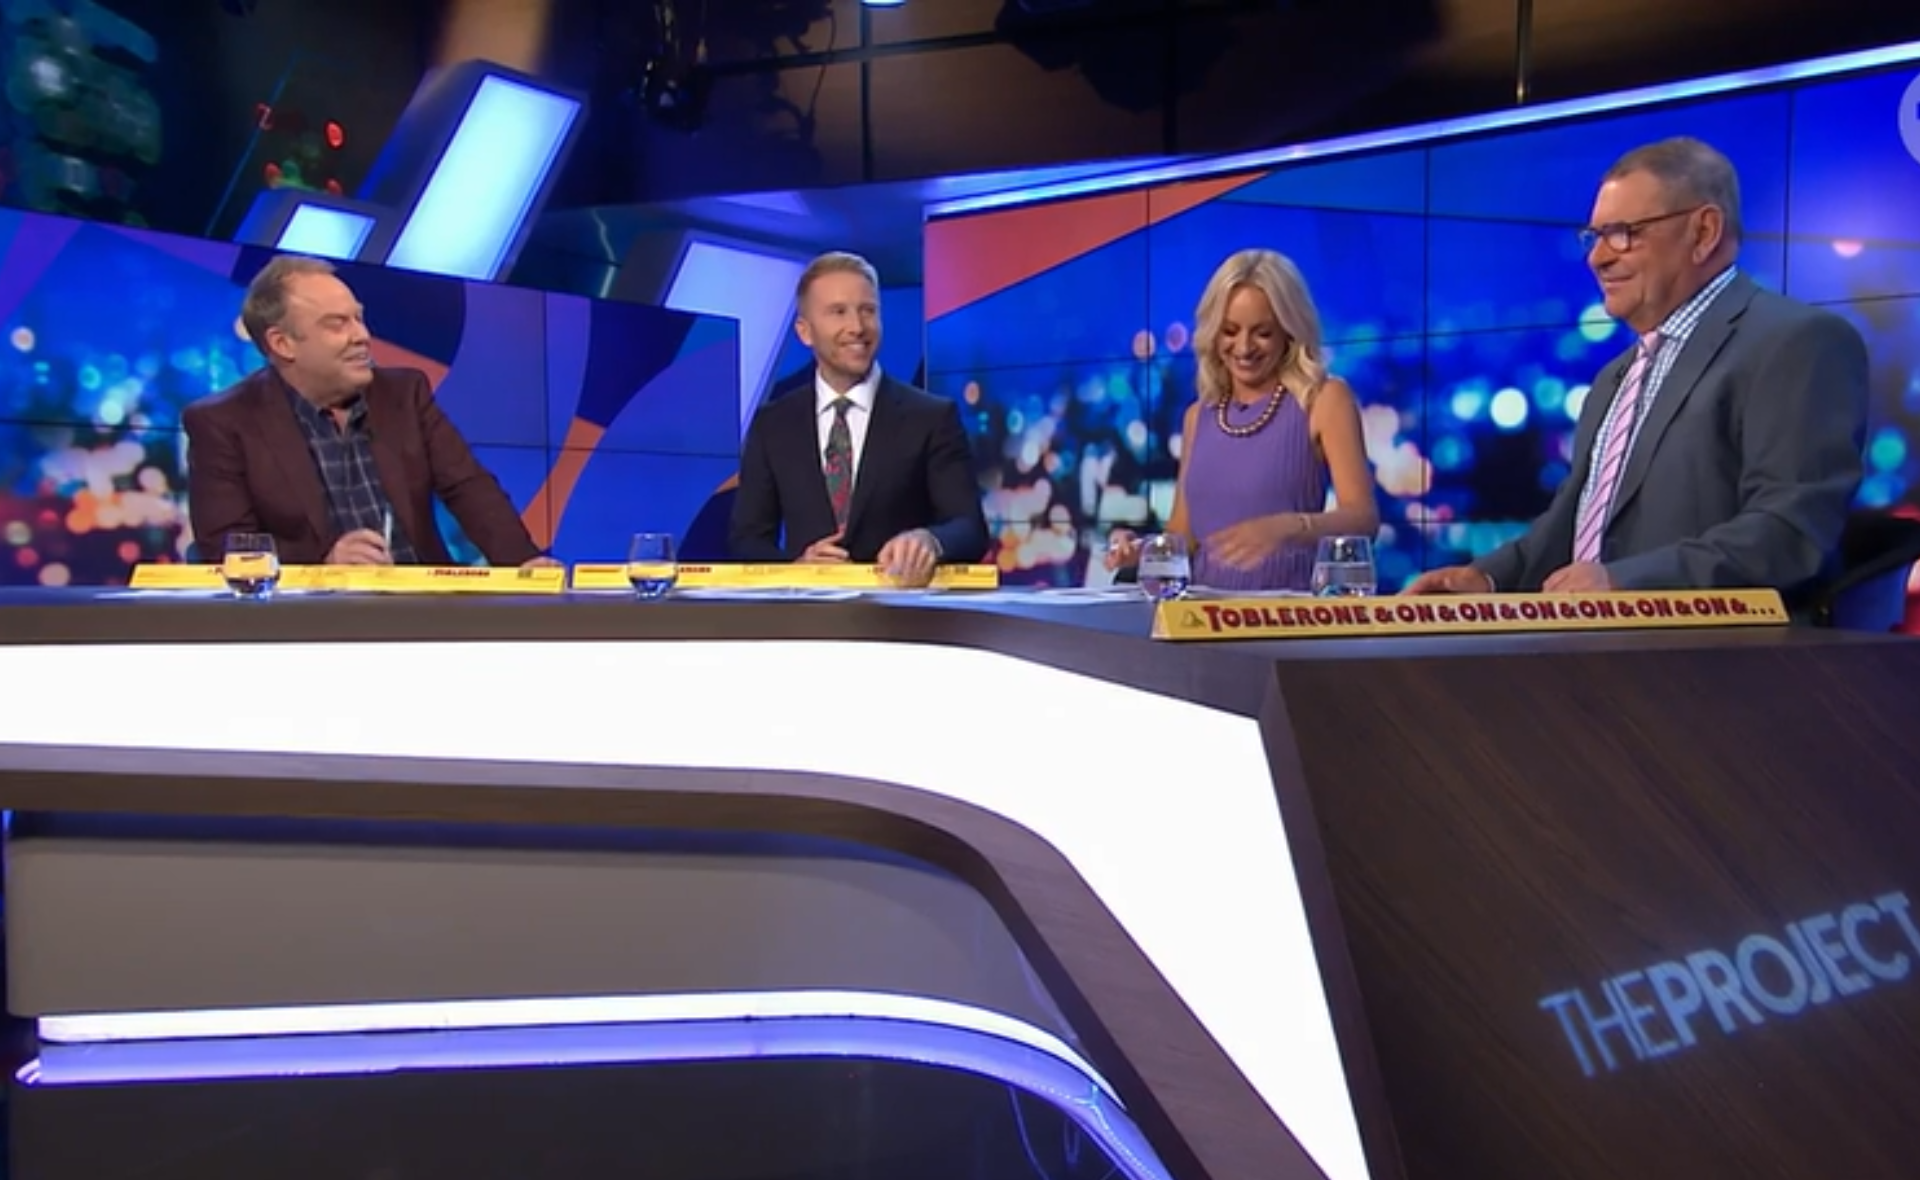 Carrie Bickmore makes her return to The Project, but her team weren’t afraid to poke a little fun at her